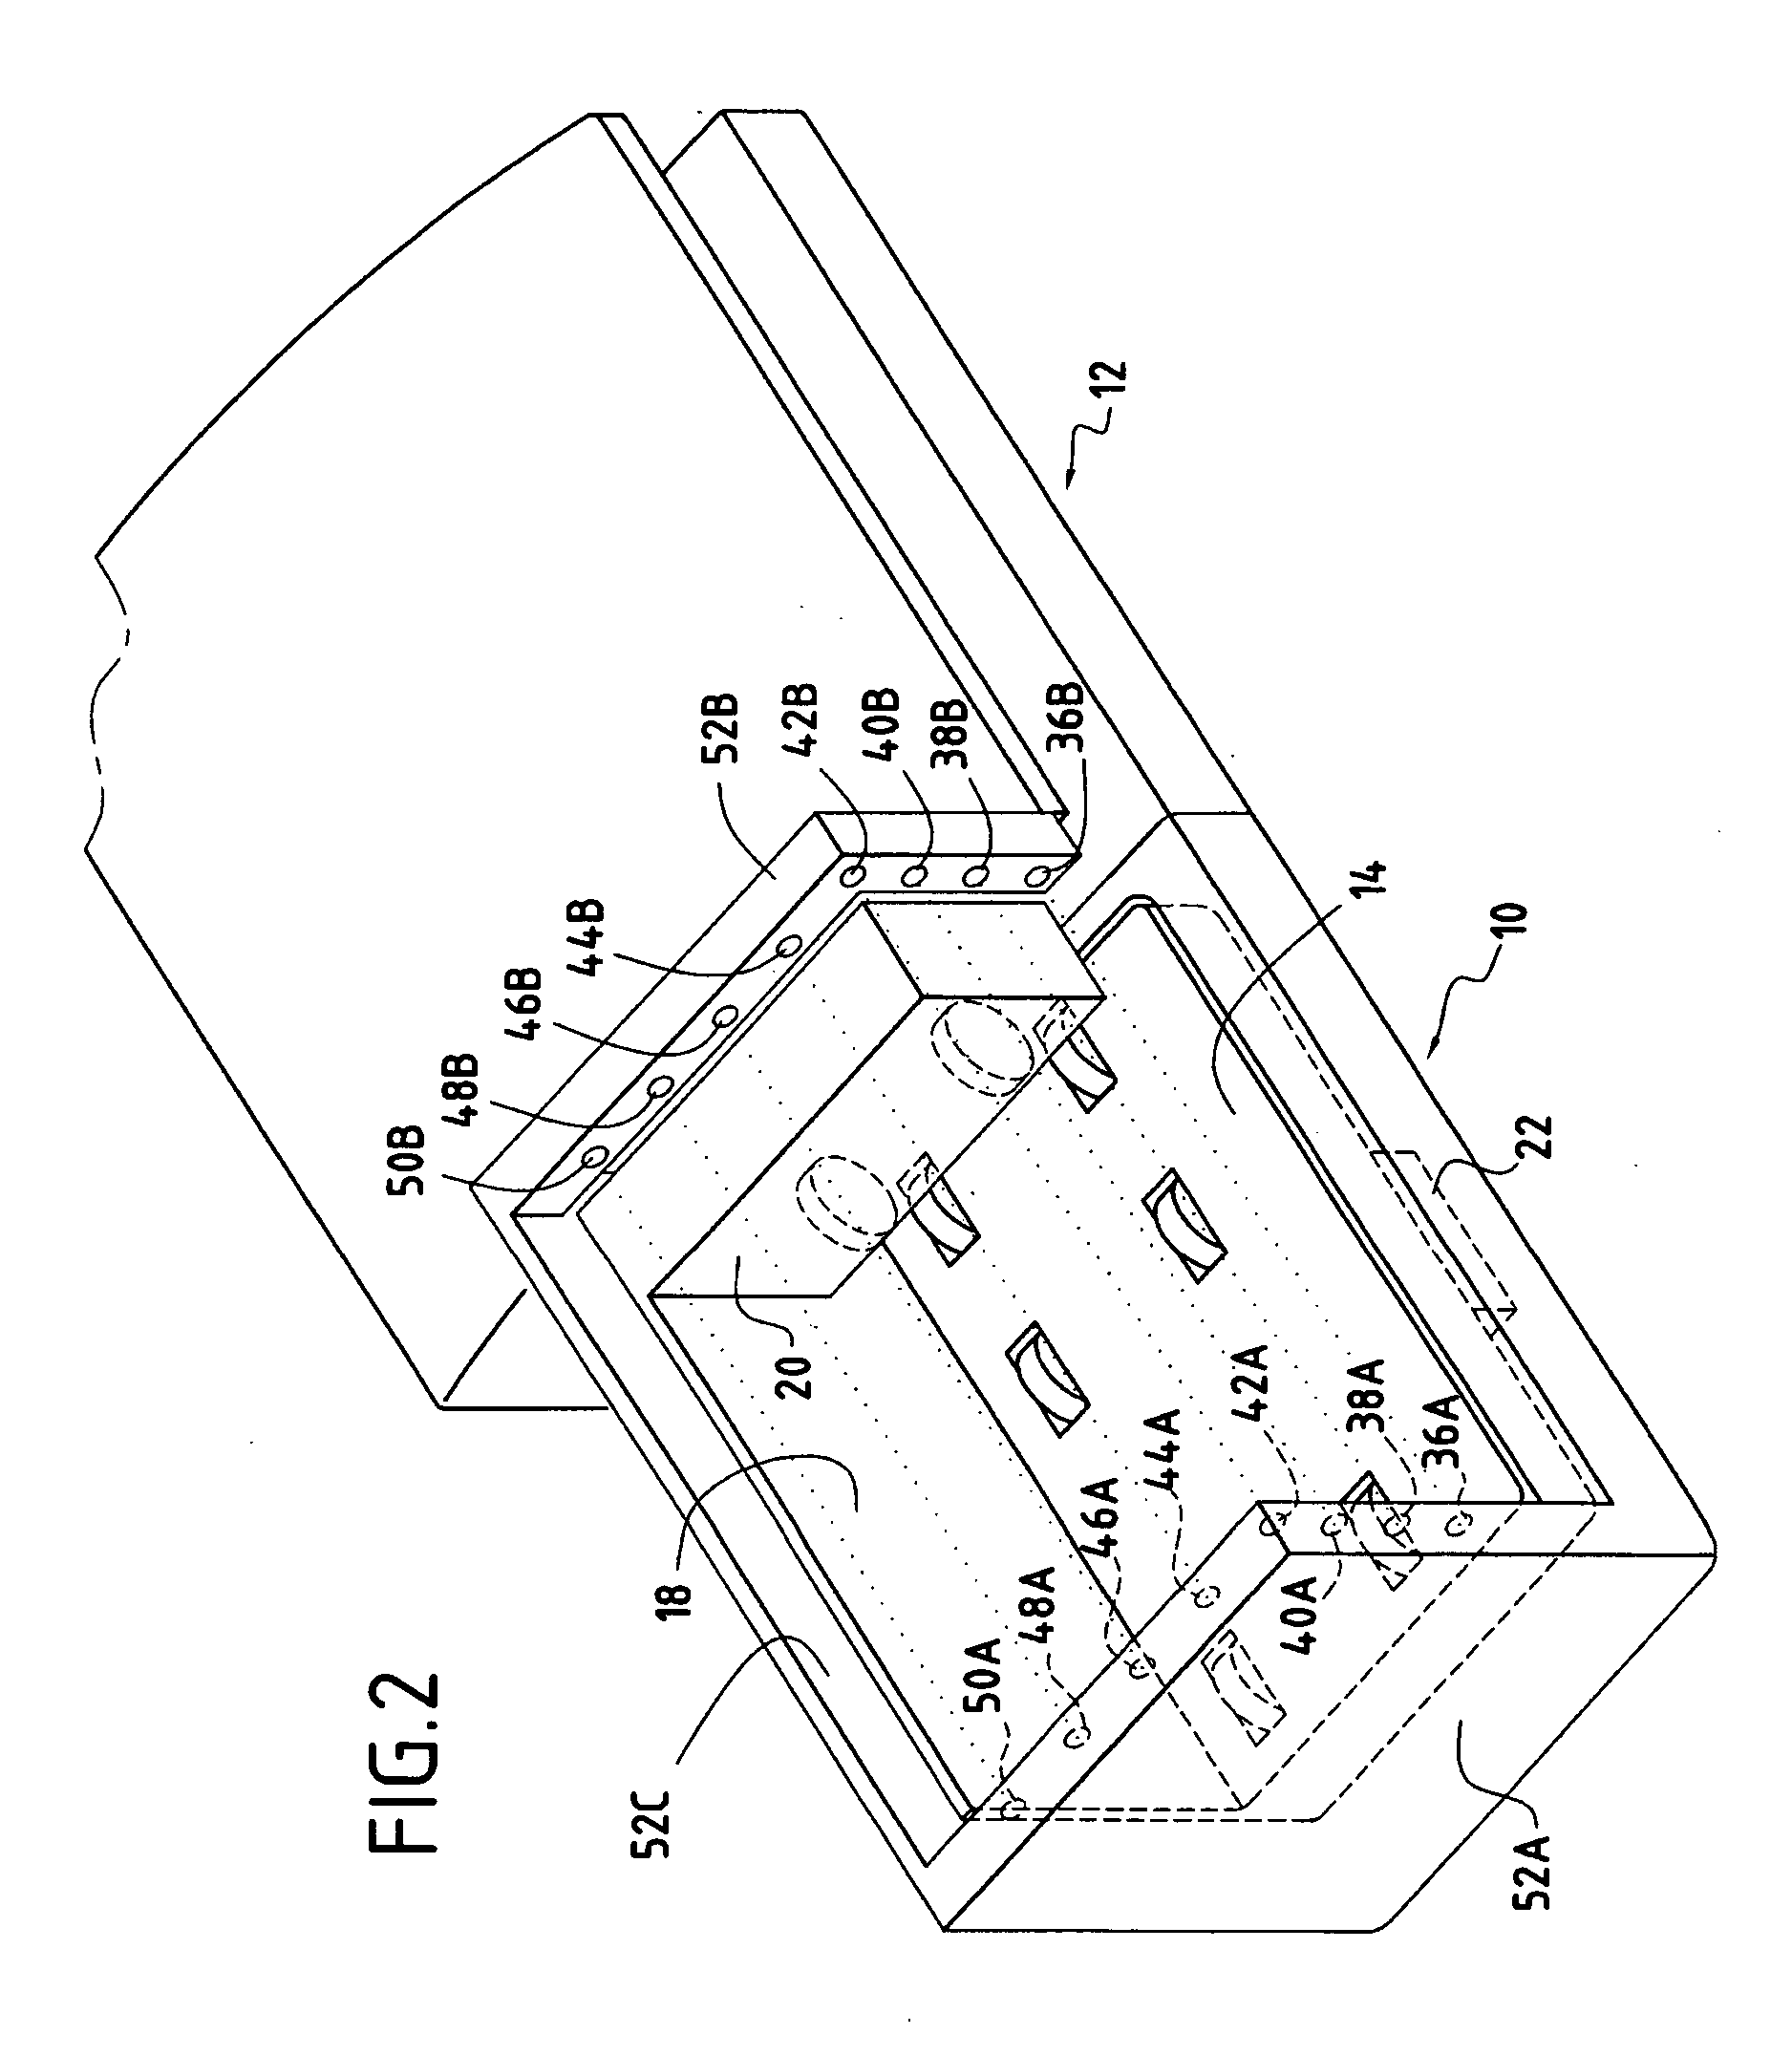 Feeder device with an integrated differential weigh module